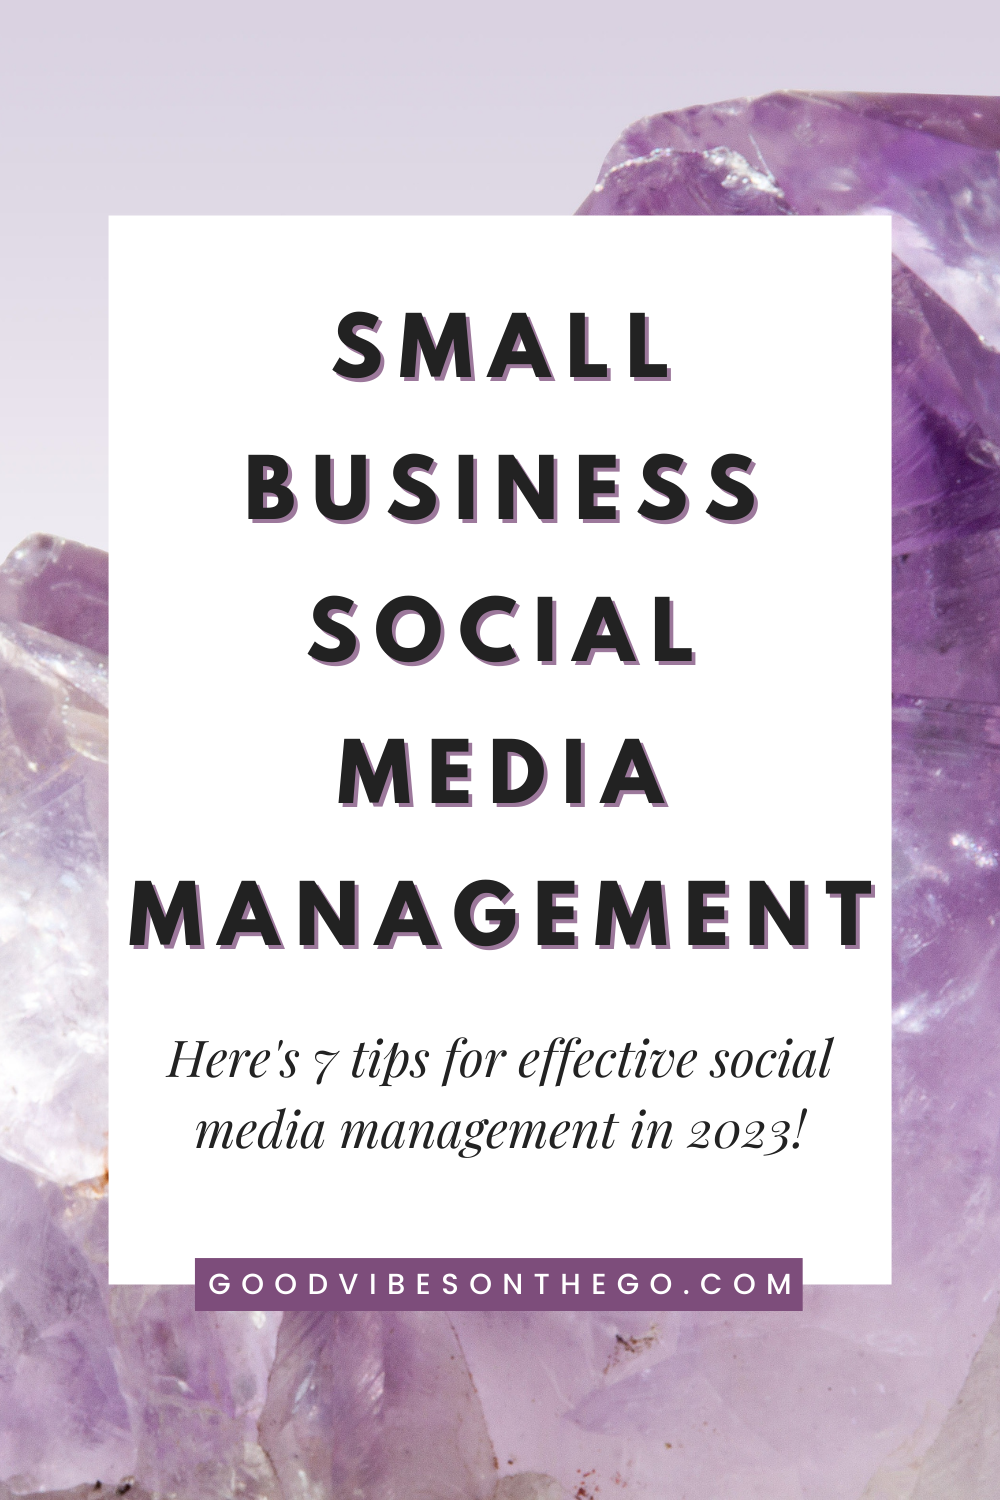 7 Social Media Management Tips for Small Business